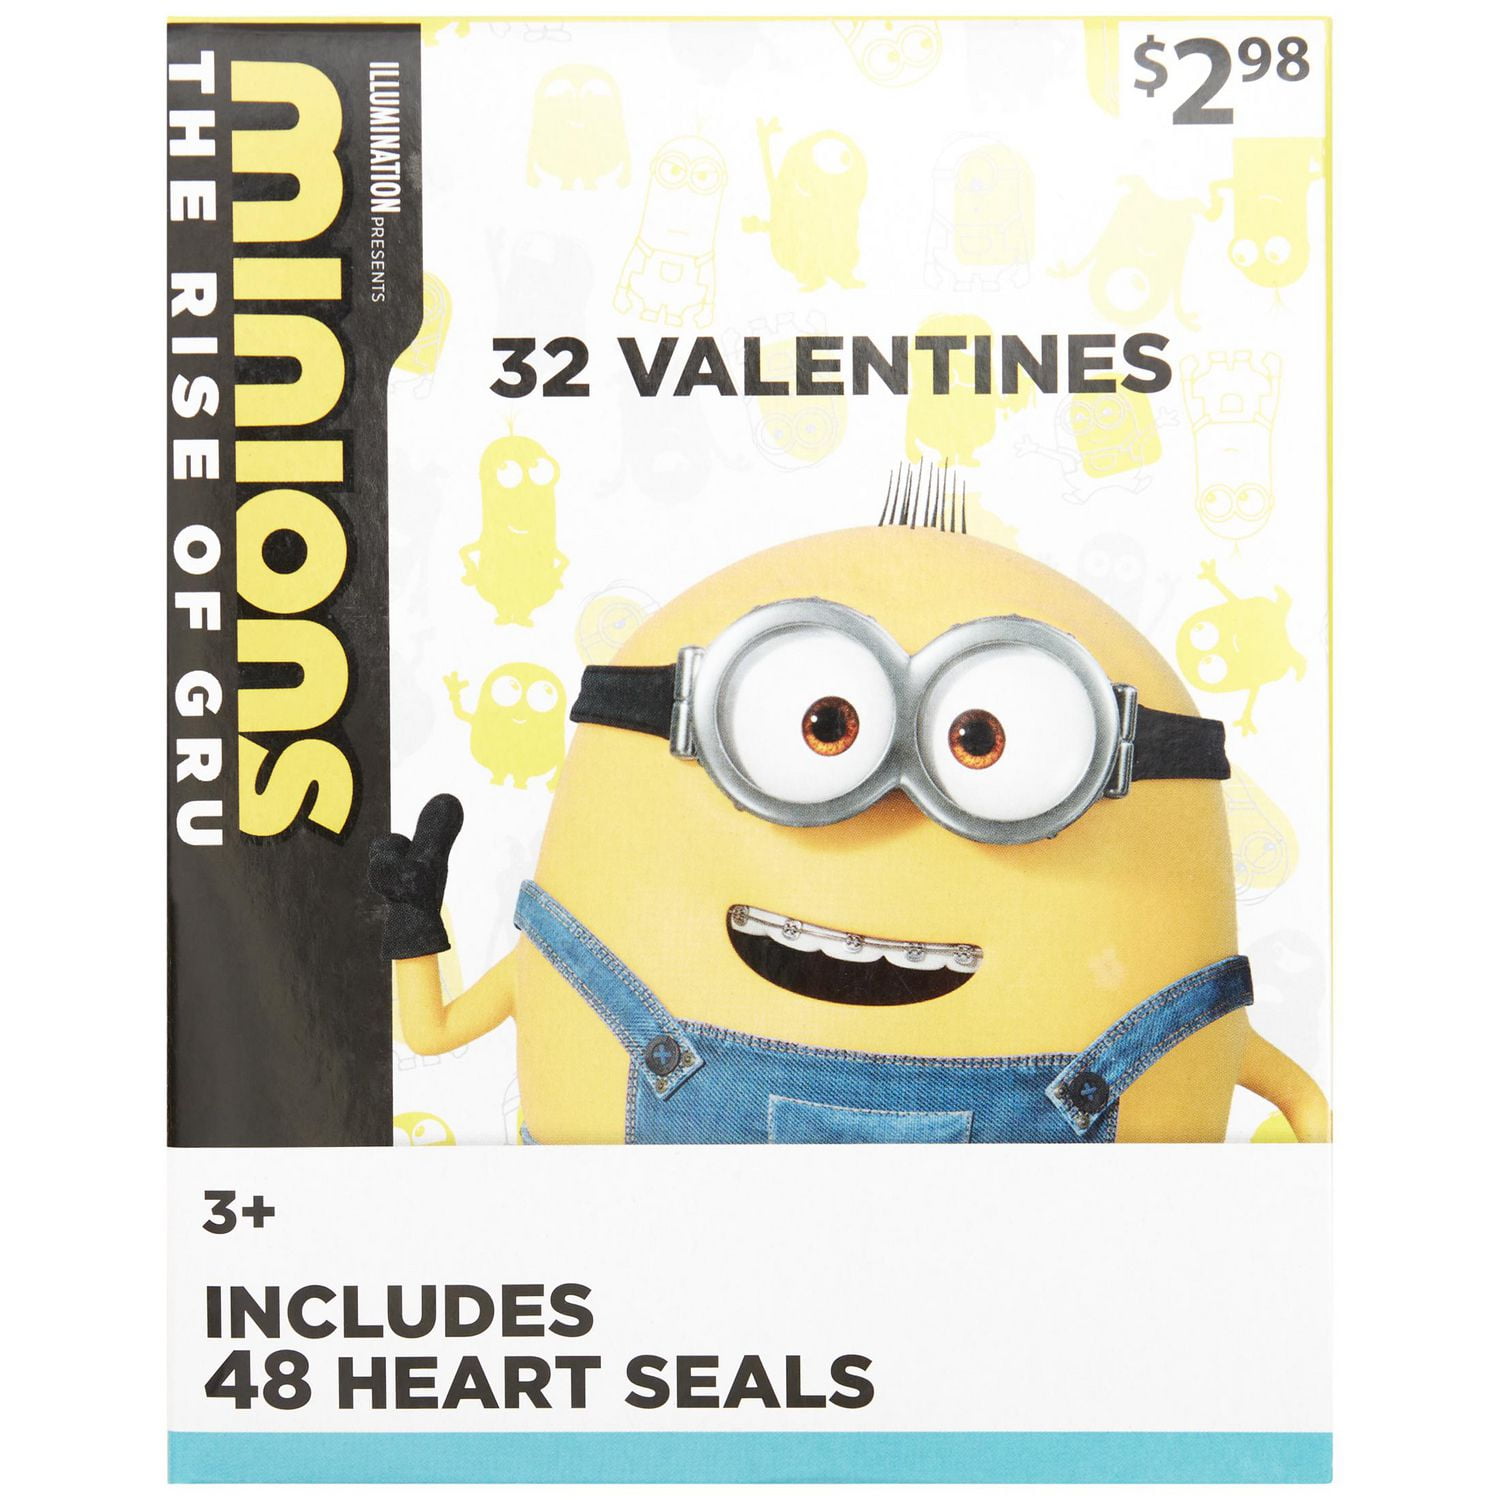 Minions Go Bananas Funny Pop-Up Valentine's Day Card With Sound - Greeting  Cards